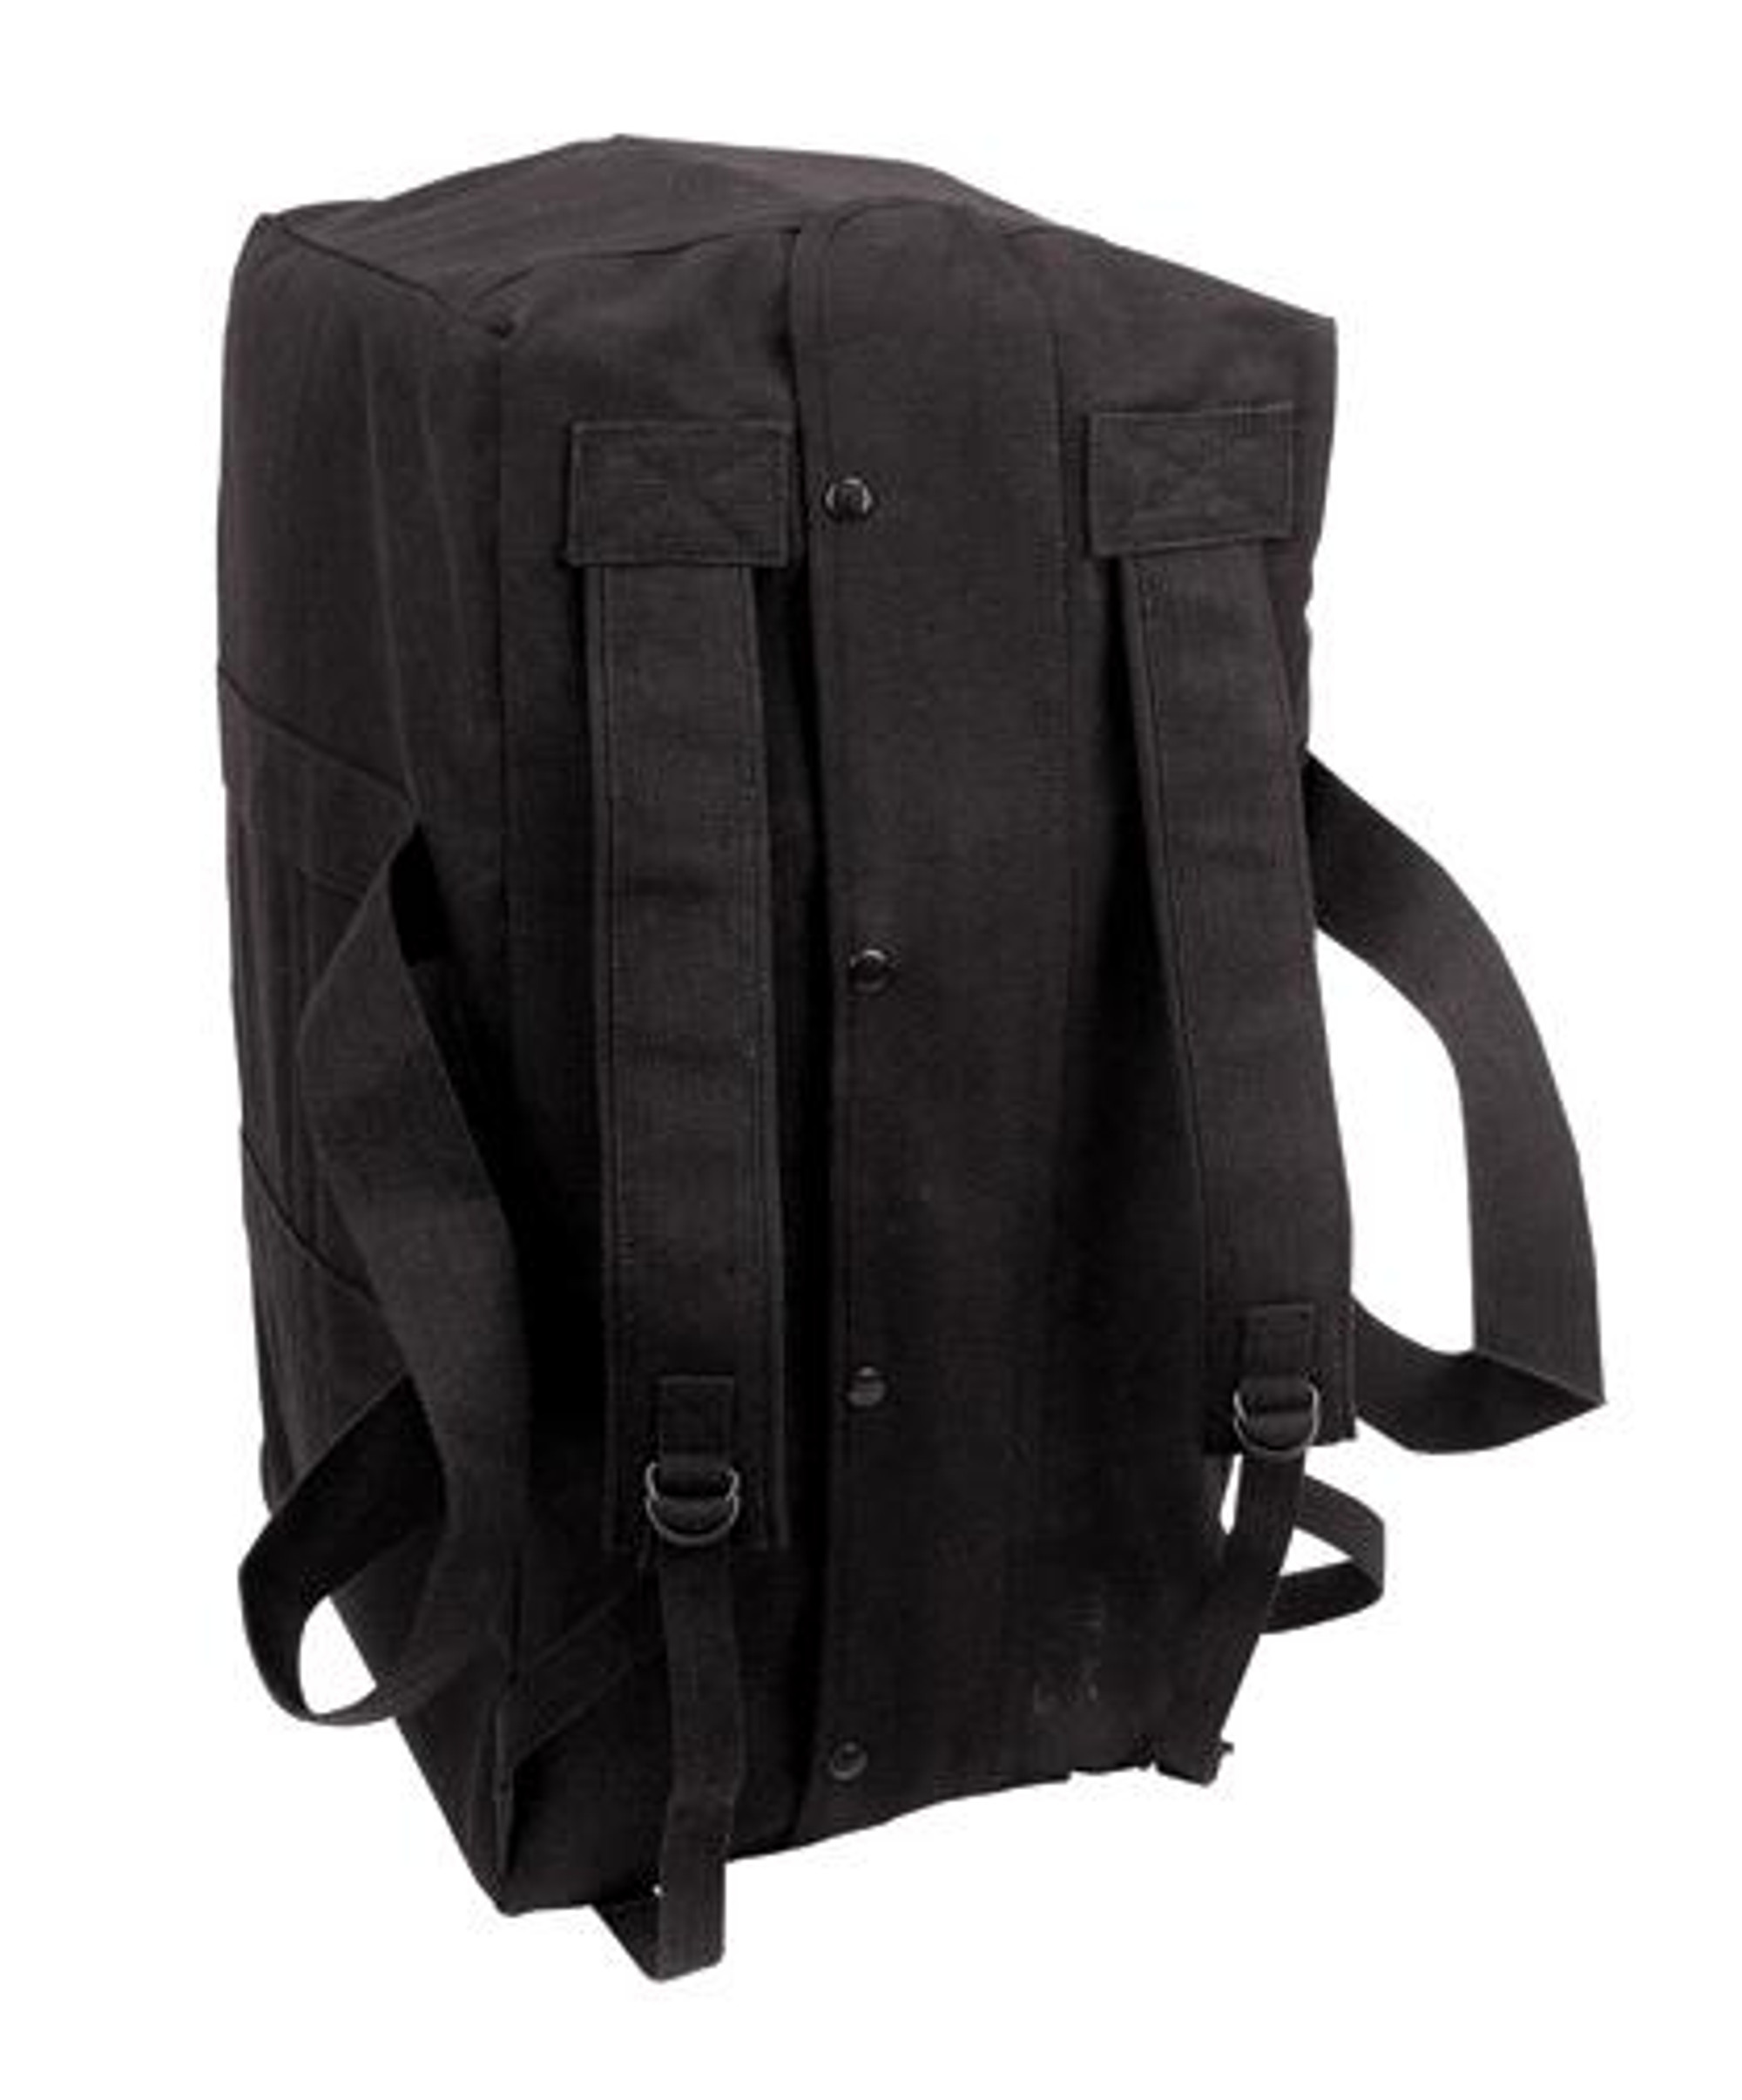 Rothco Mossad Type Tactical Canvas Cargo Bag/Backpack - Black